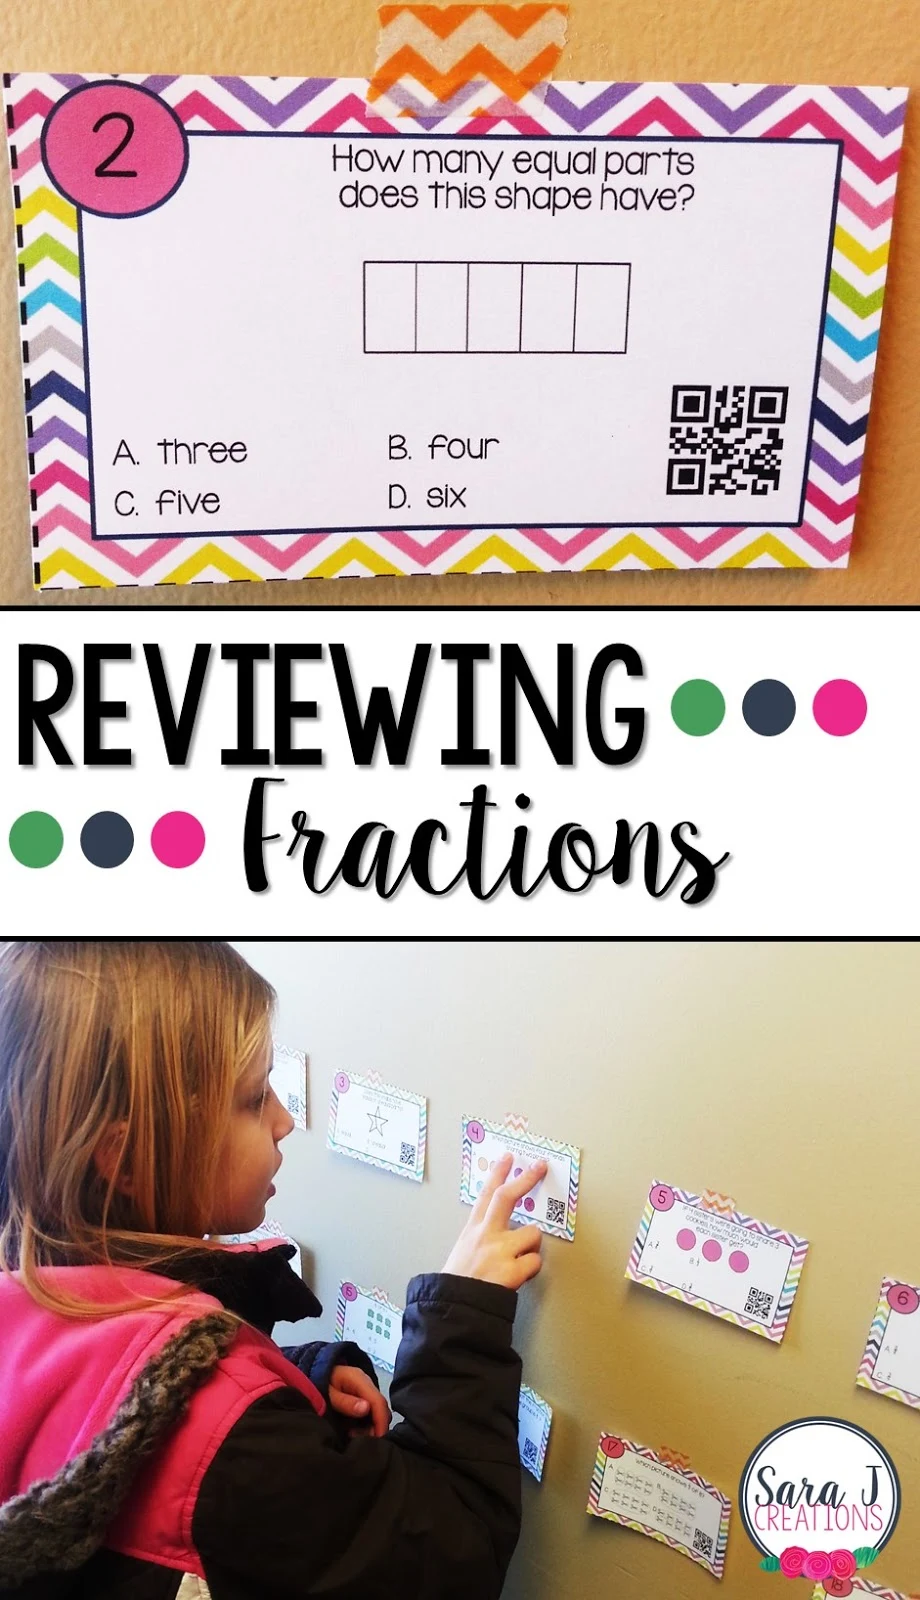 Adding QR codes makes practicing fractions activities even more fun and interactive.